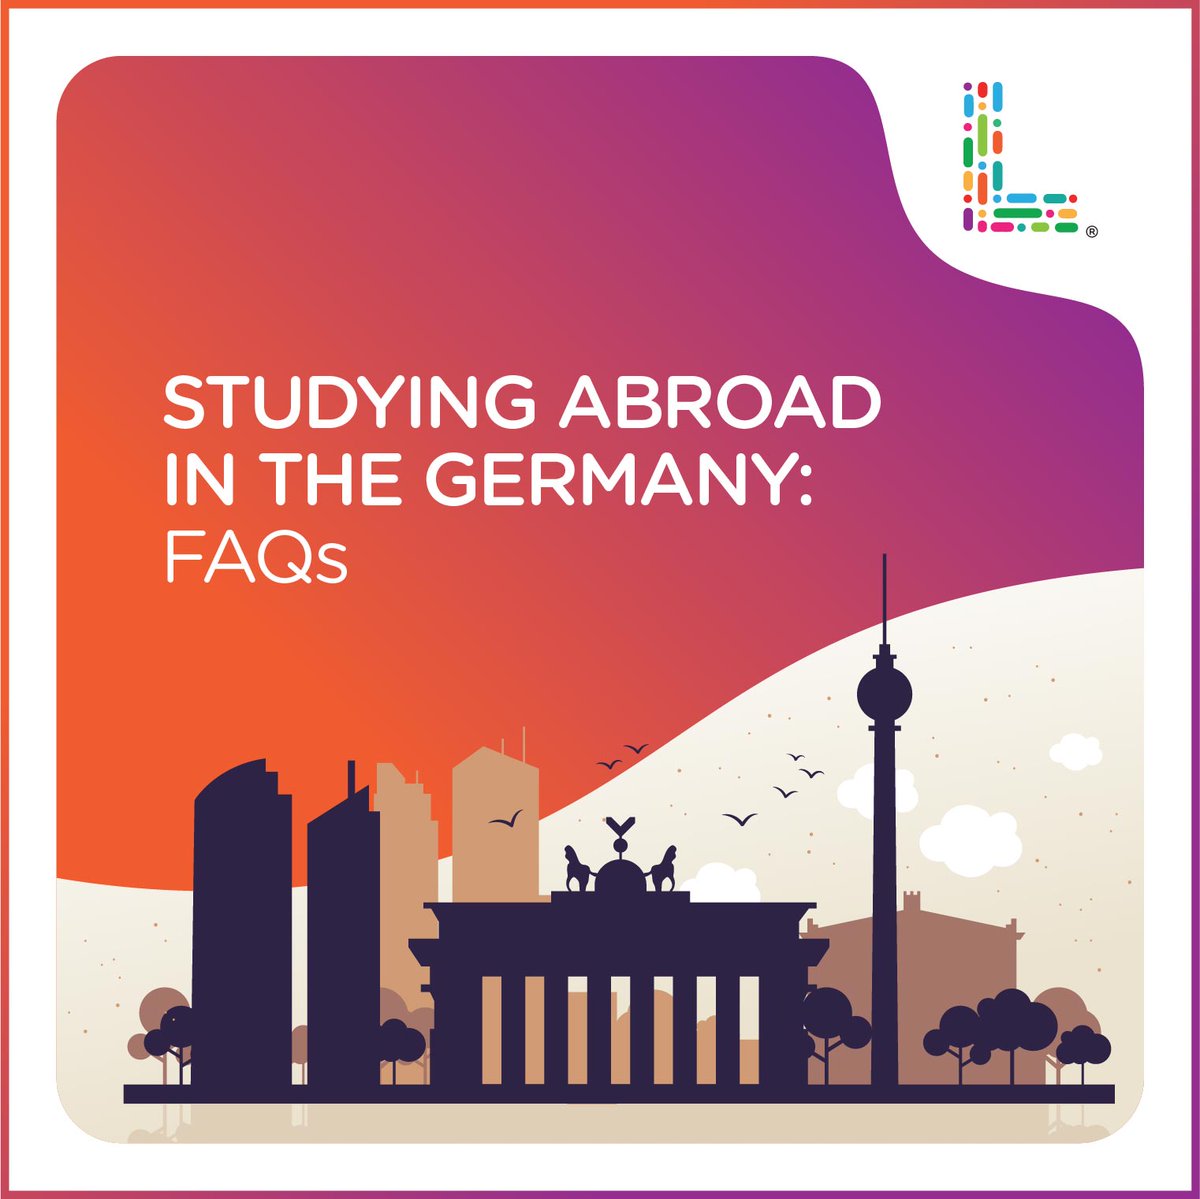 In this article, we answer the questions that have been bothering you about studying abroad in Germany as an international student.

Read more: bit.ly/3jA9chd 

#FAQ #Germany #StudyInGermany #InternationalStudents #QnA #LurnAbroad #QuestionsAnswers #GermanUniversities